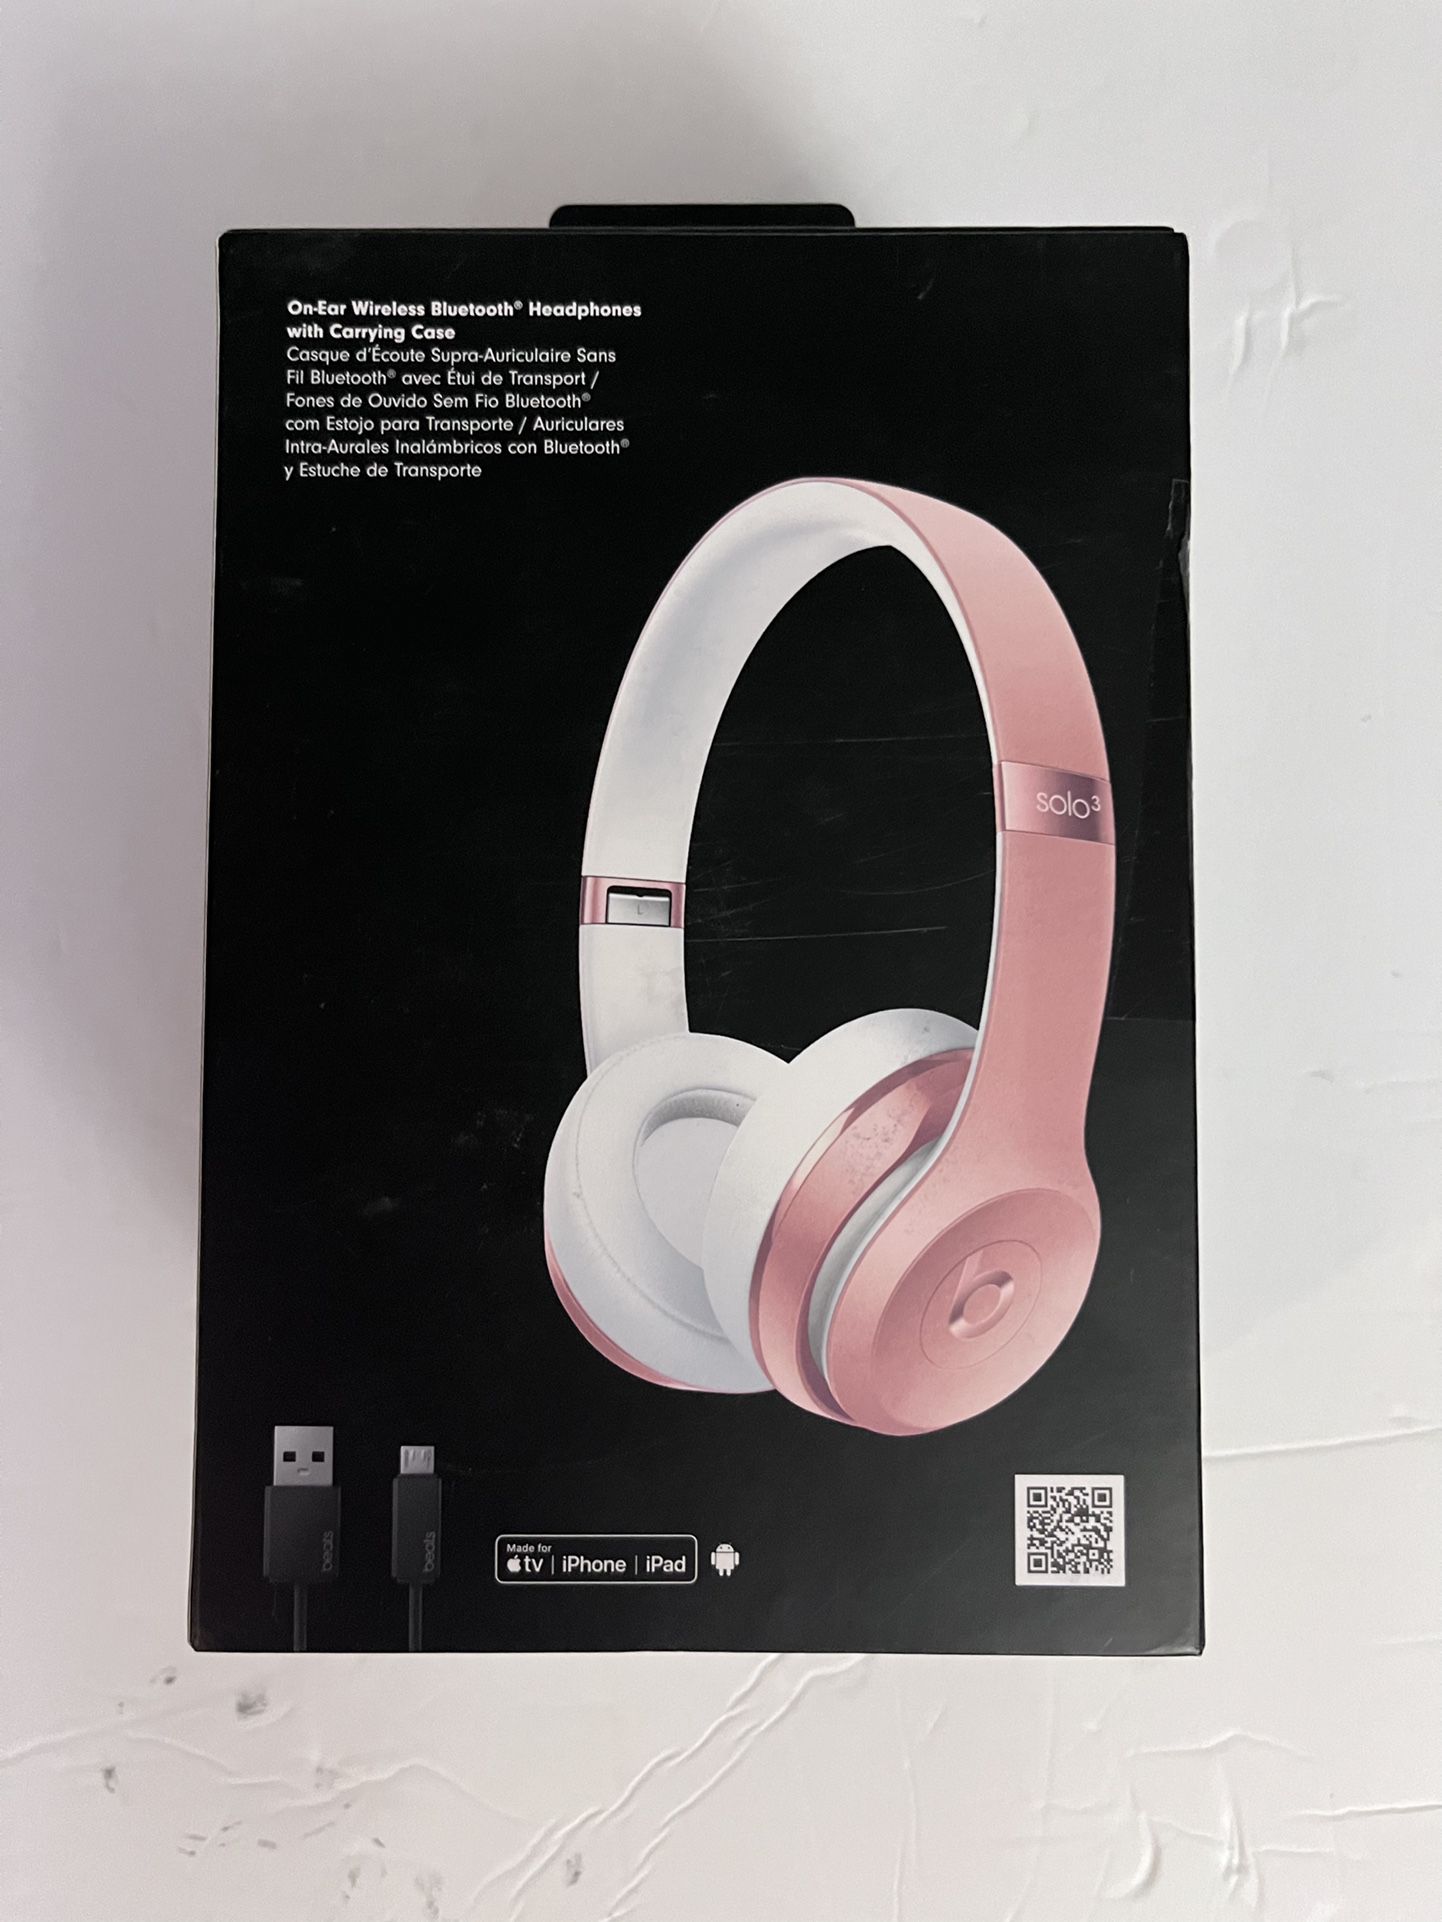 Beats Solo3 Wireless On-Ear Headphones - Apple W1 Headphone Chip, Class 1 Bluetooth, 40 Hours of Listening Time, Built-in Microphone - Rose Gold (Late